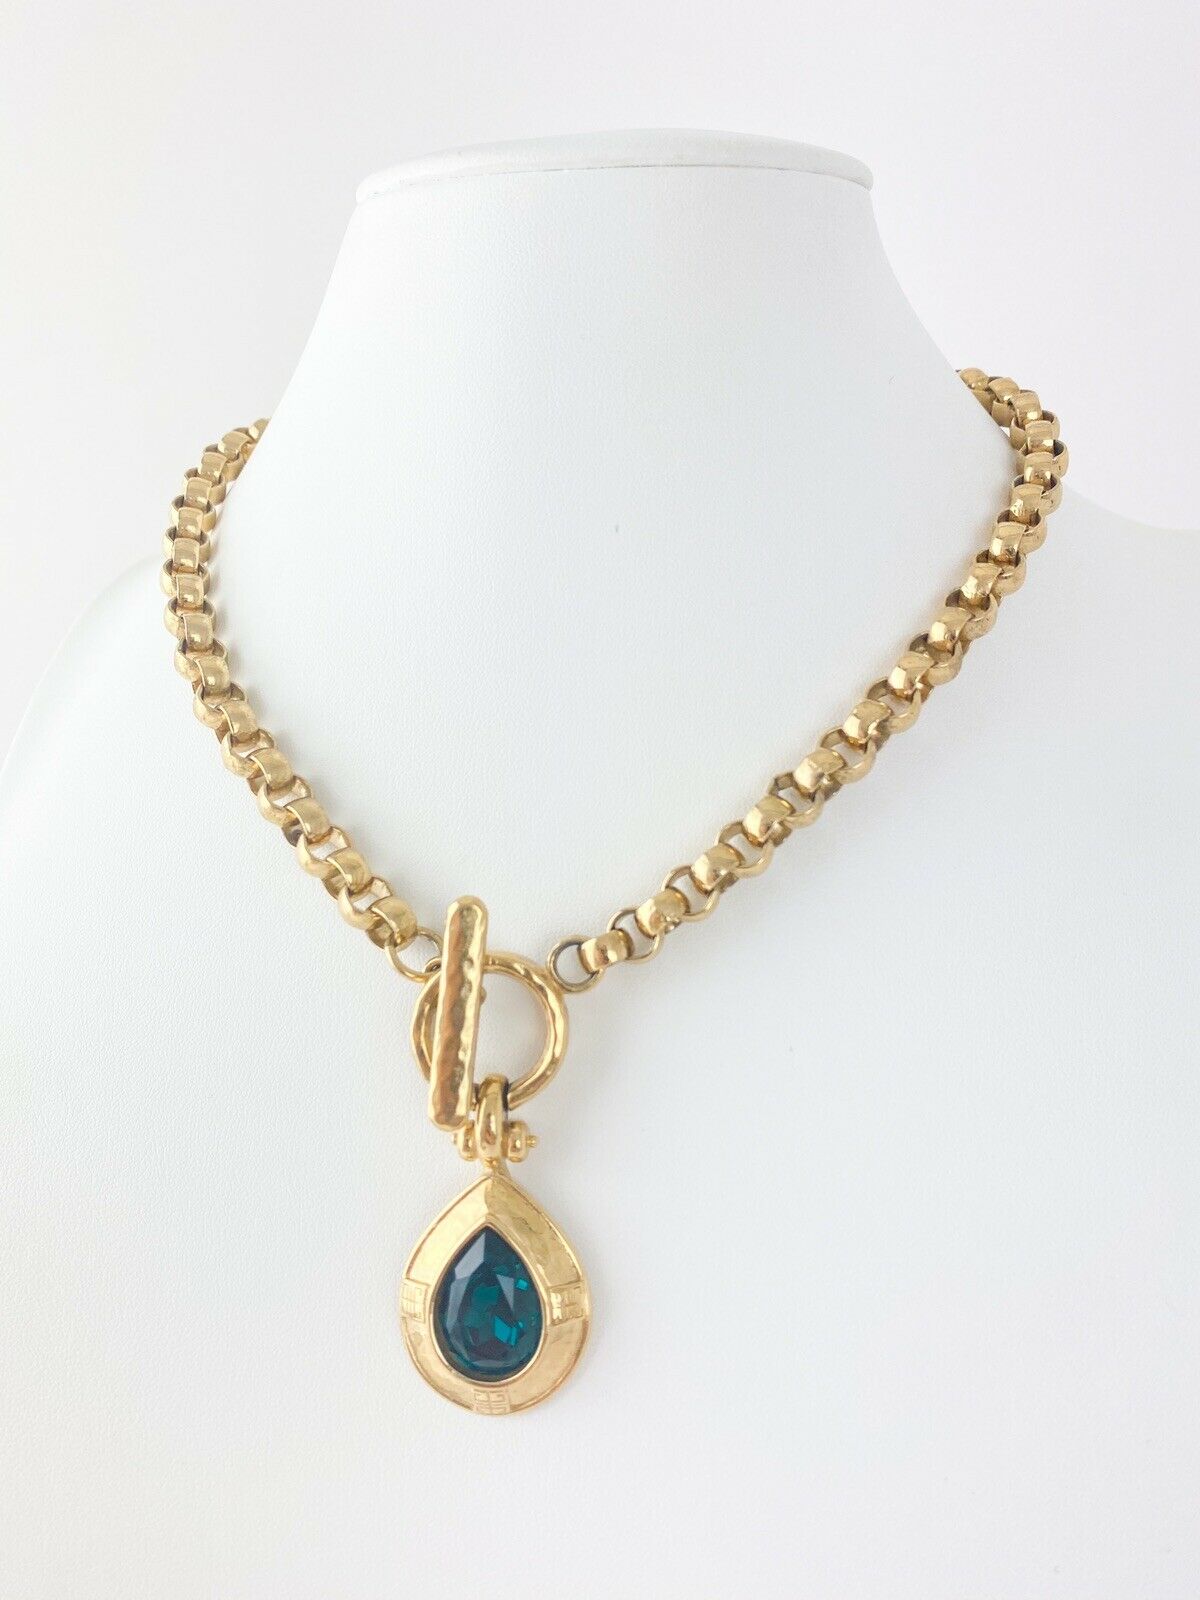 【SOLD OUT】Givenchy Gold Tone Vintage Chain Necklace Emerald Green Rhinestone Dew Drop